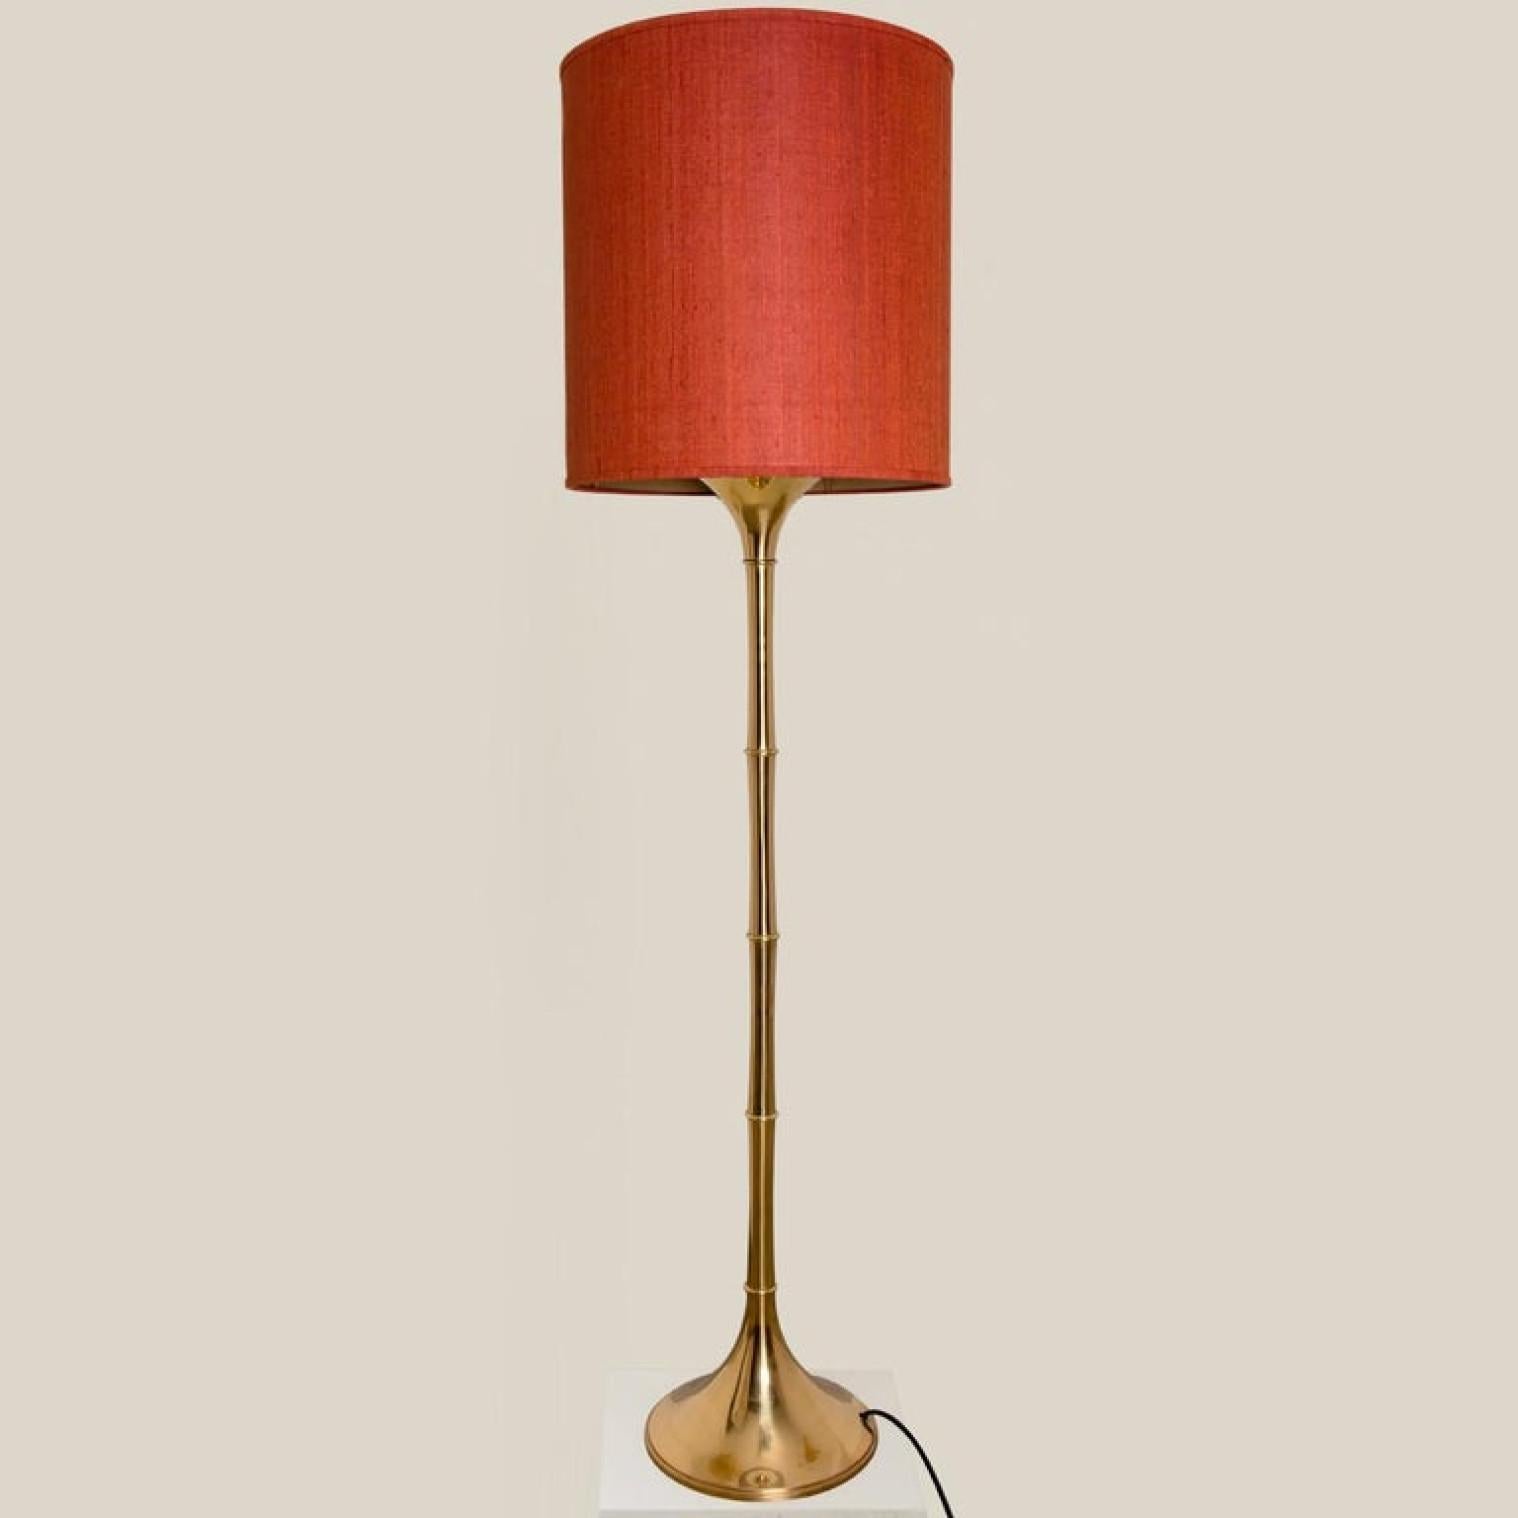 Pair of Table and Floor Lamp Designed by Ingo Maurer, 1968 For Sale 1